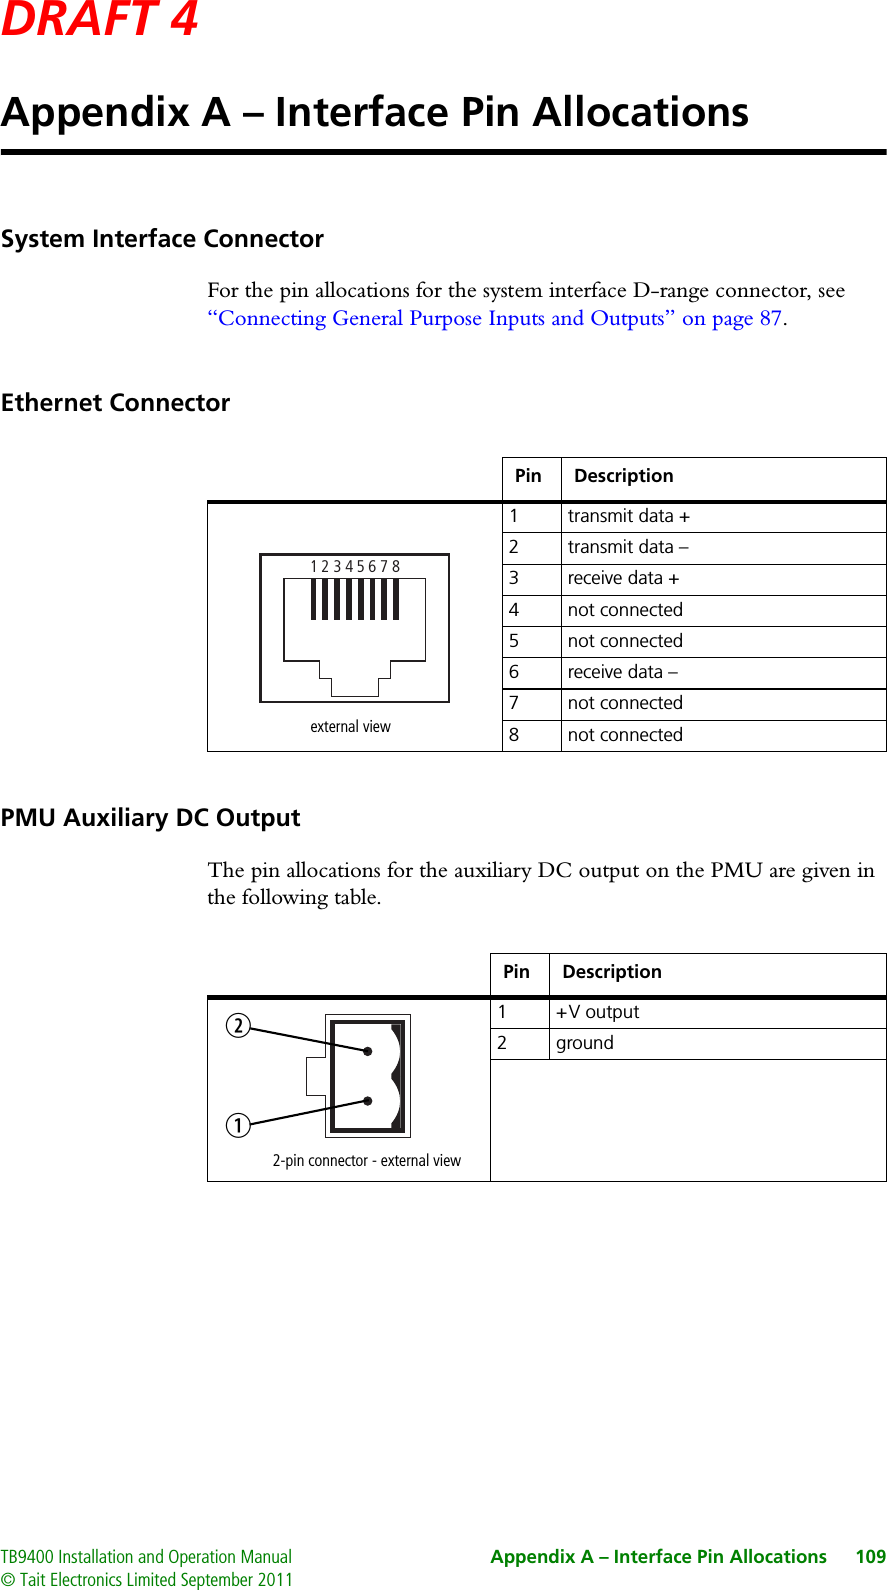 DRAFT 4 TB9400 Installation and Operation Manual Appendix A – Interface Pin Allocations 109© Tait Electronics Limited September 2011Appendix A – Interface Pin AllocationsSystem Interface ConnectorFor the pin allocations for the system interface D-range connector, see “Connecting General Purpose Inputs and Outputs” on page 87.Ethernet ConnectorPMU Auxiliary DC OutputThe pin allocations for the auxiliary DC output on the PMU are given in the following table.Pin Description1 transmit data +2 transmit data –3 receive data +4 not connected5 not connected6 receive data –7 not connected8 not connected12345678external viewPin Description1 + V  output2 ground2-pin connector - external viewbc